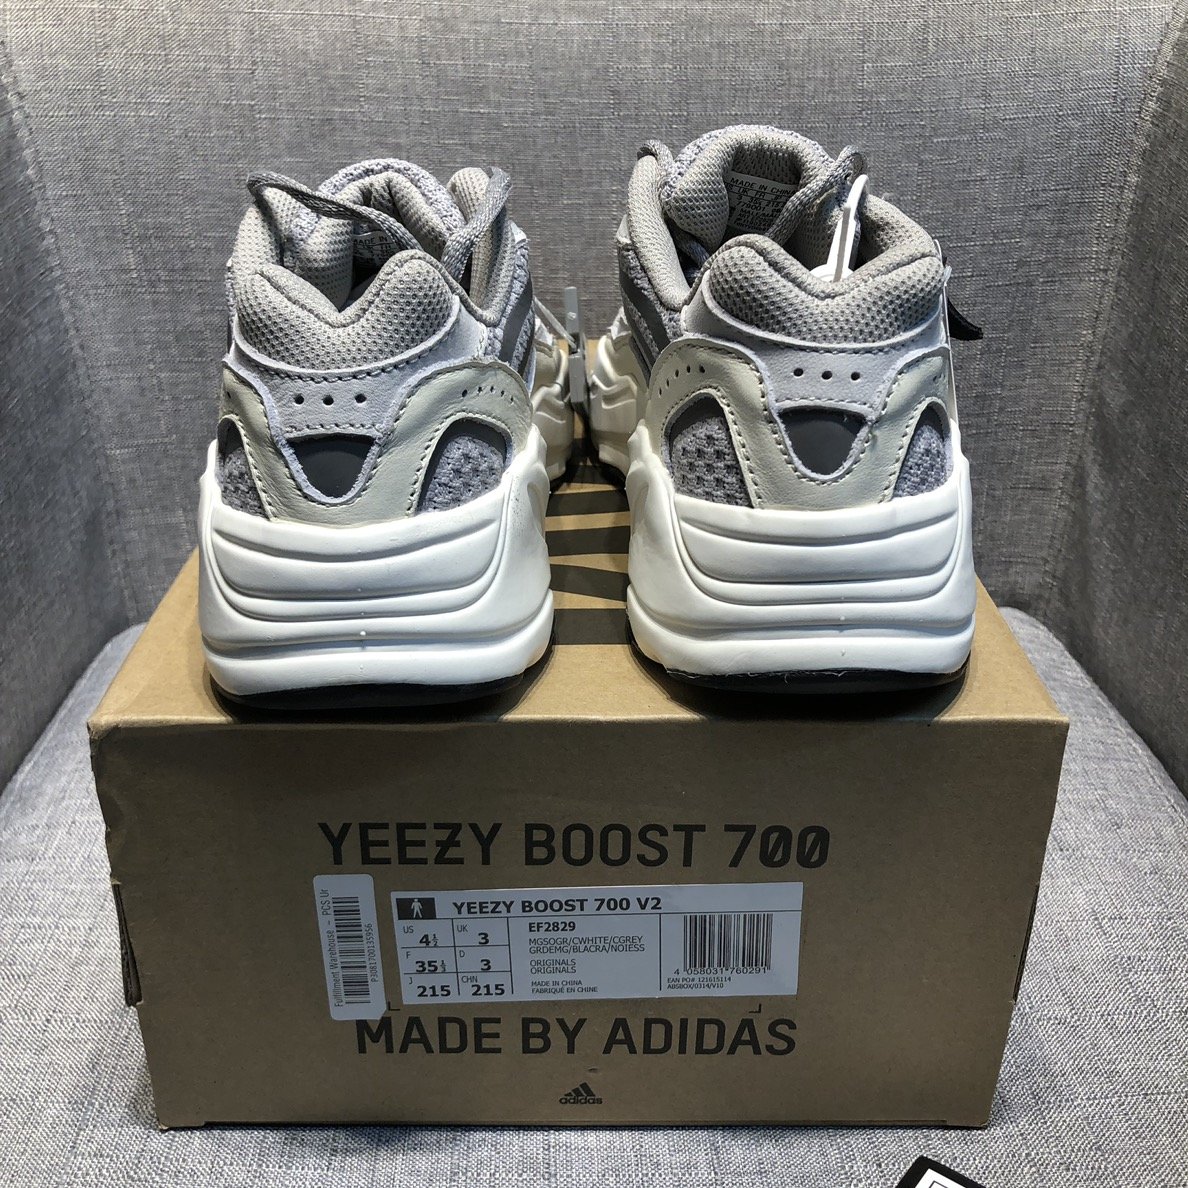 Cheap Adidas Yeezy Boost 700 Wave Runner Sneakers Unisex # 216590, cheap Adidas Yeezy Shoes, only $109!